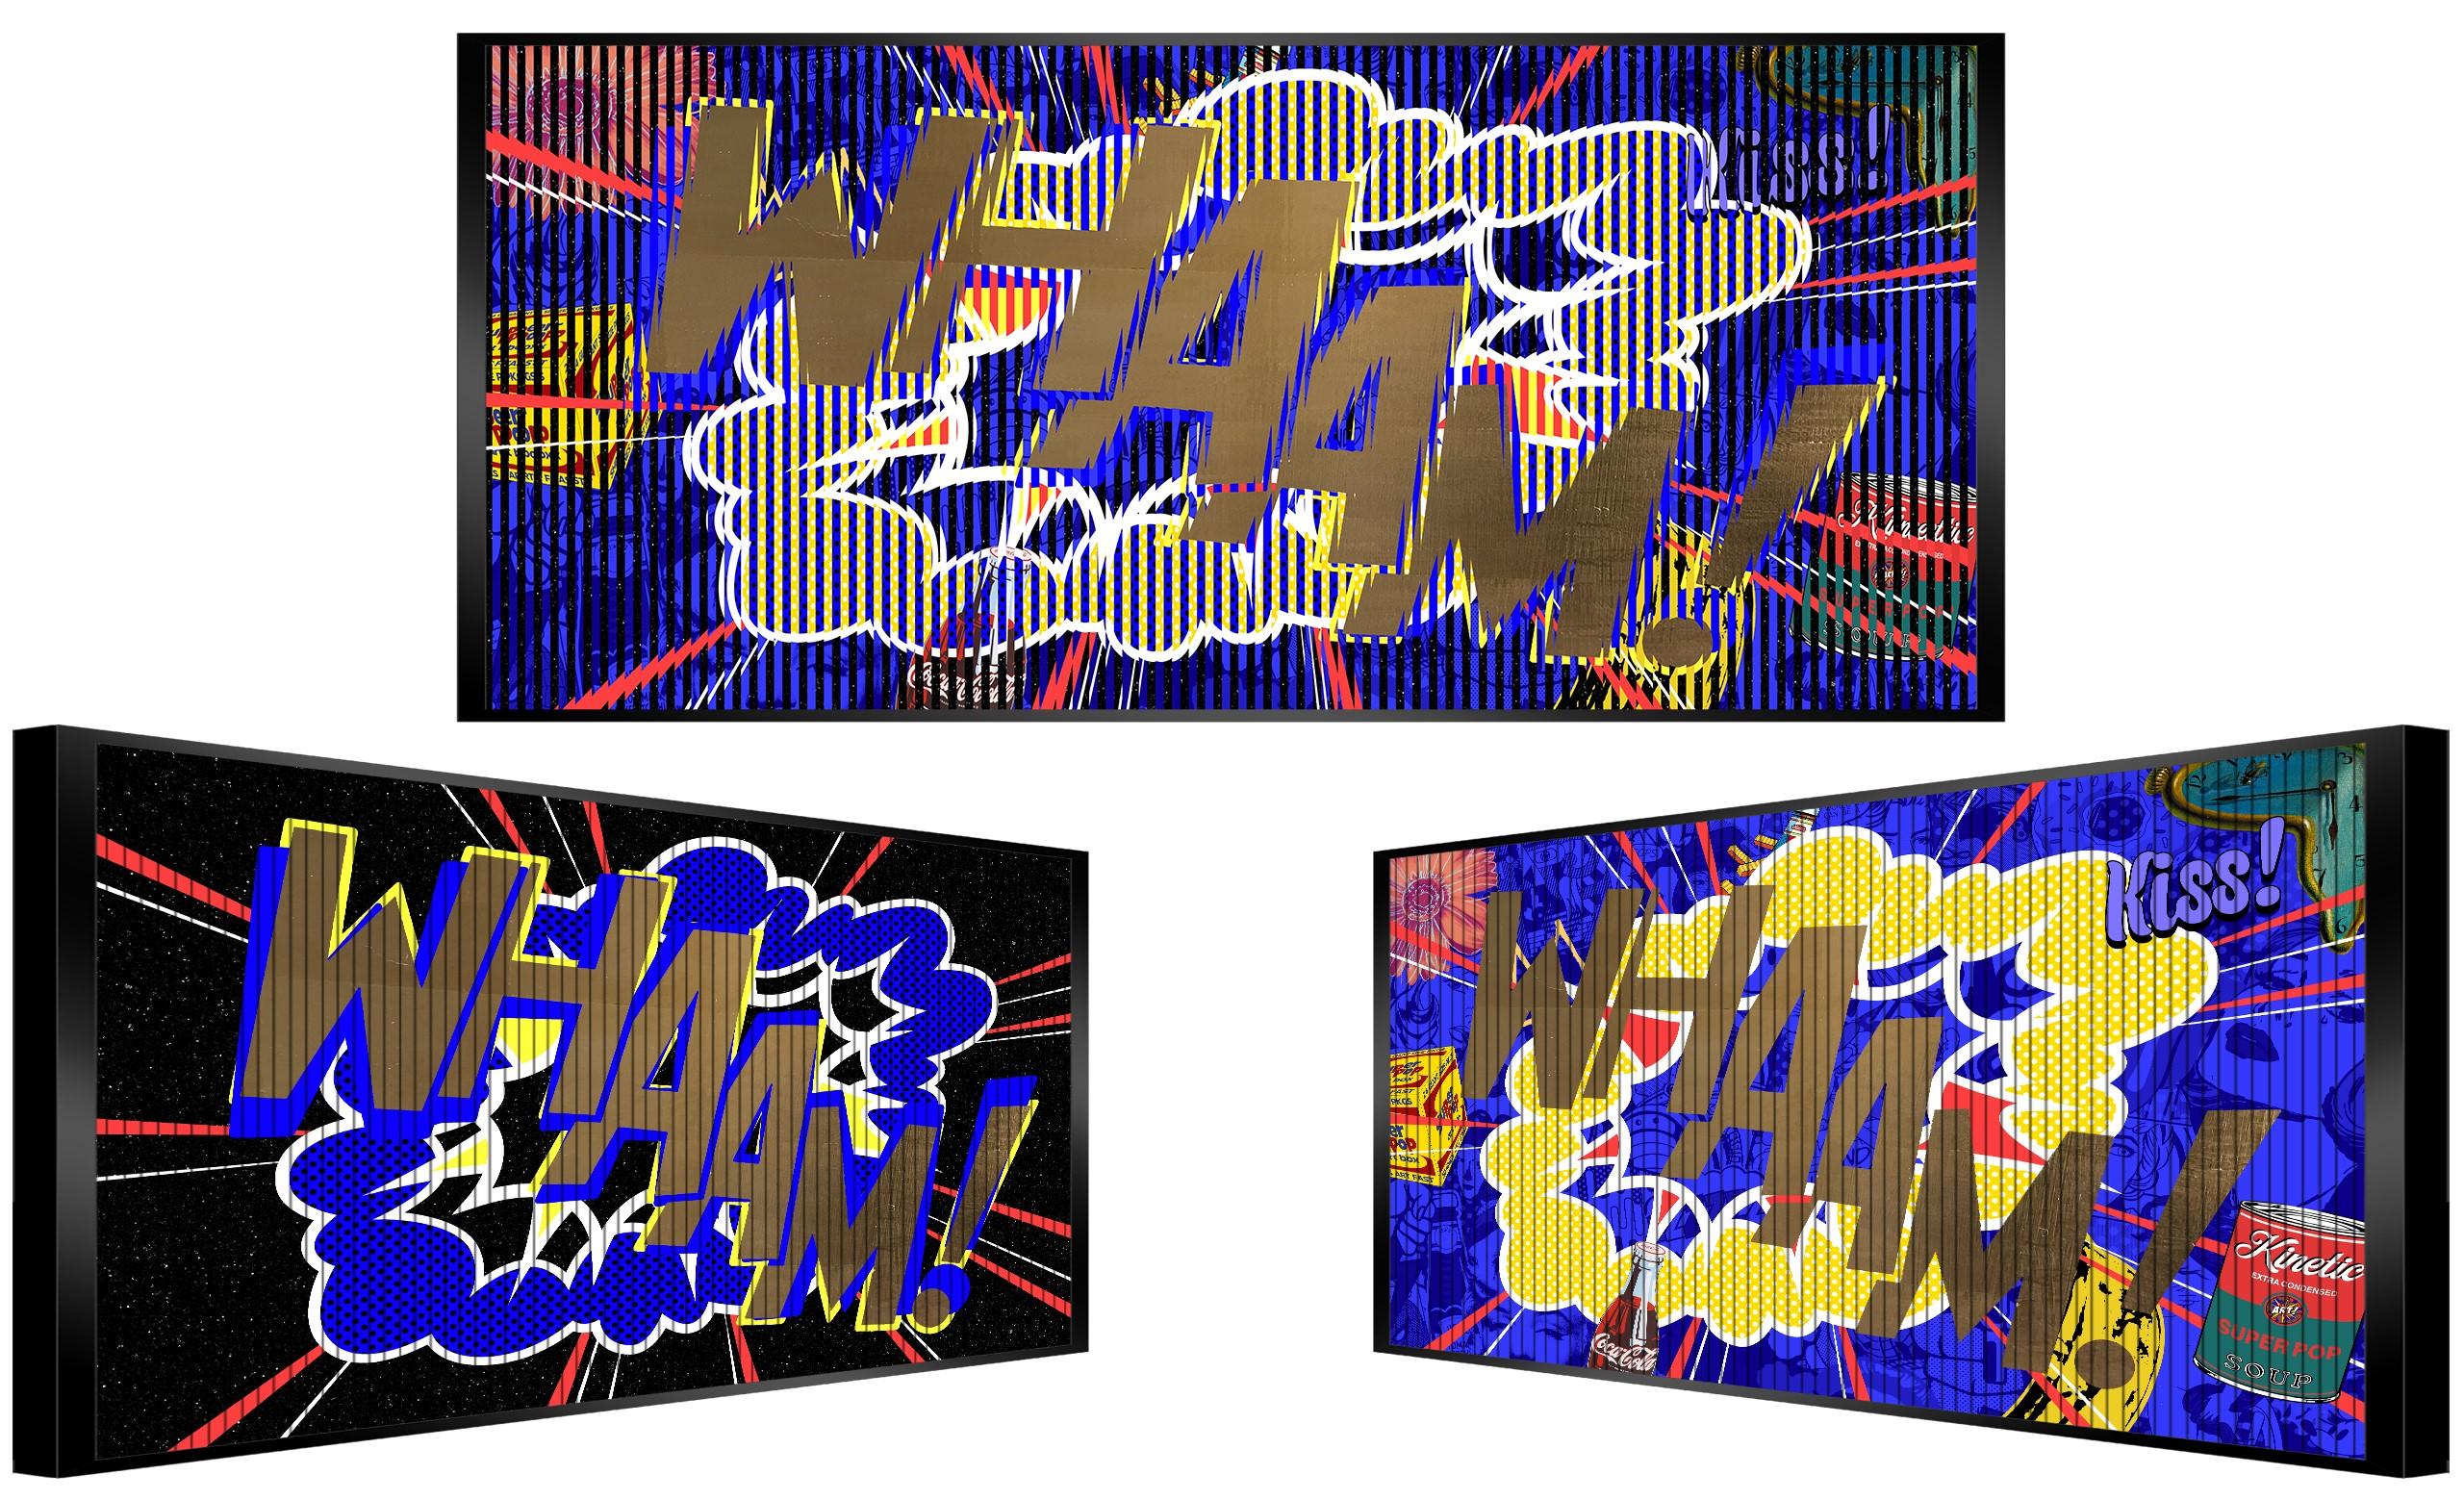 Oh Whaam, mixed media with gold leaf, 2022, pop art, 34 inches, by Rubinstein